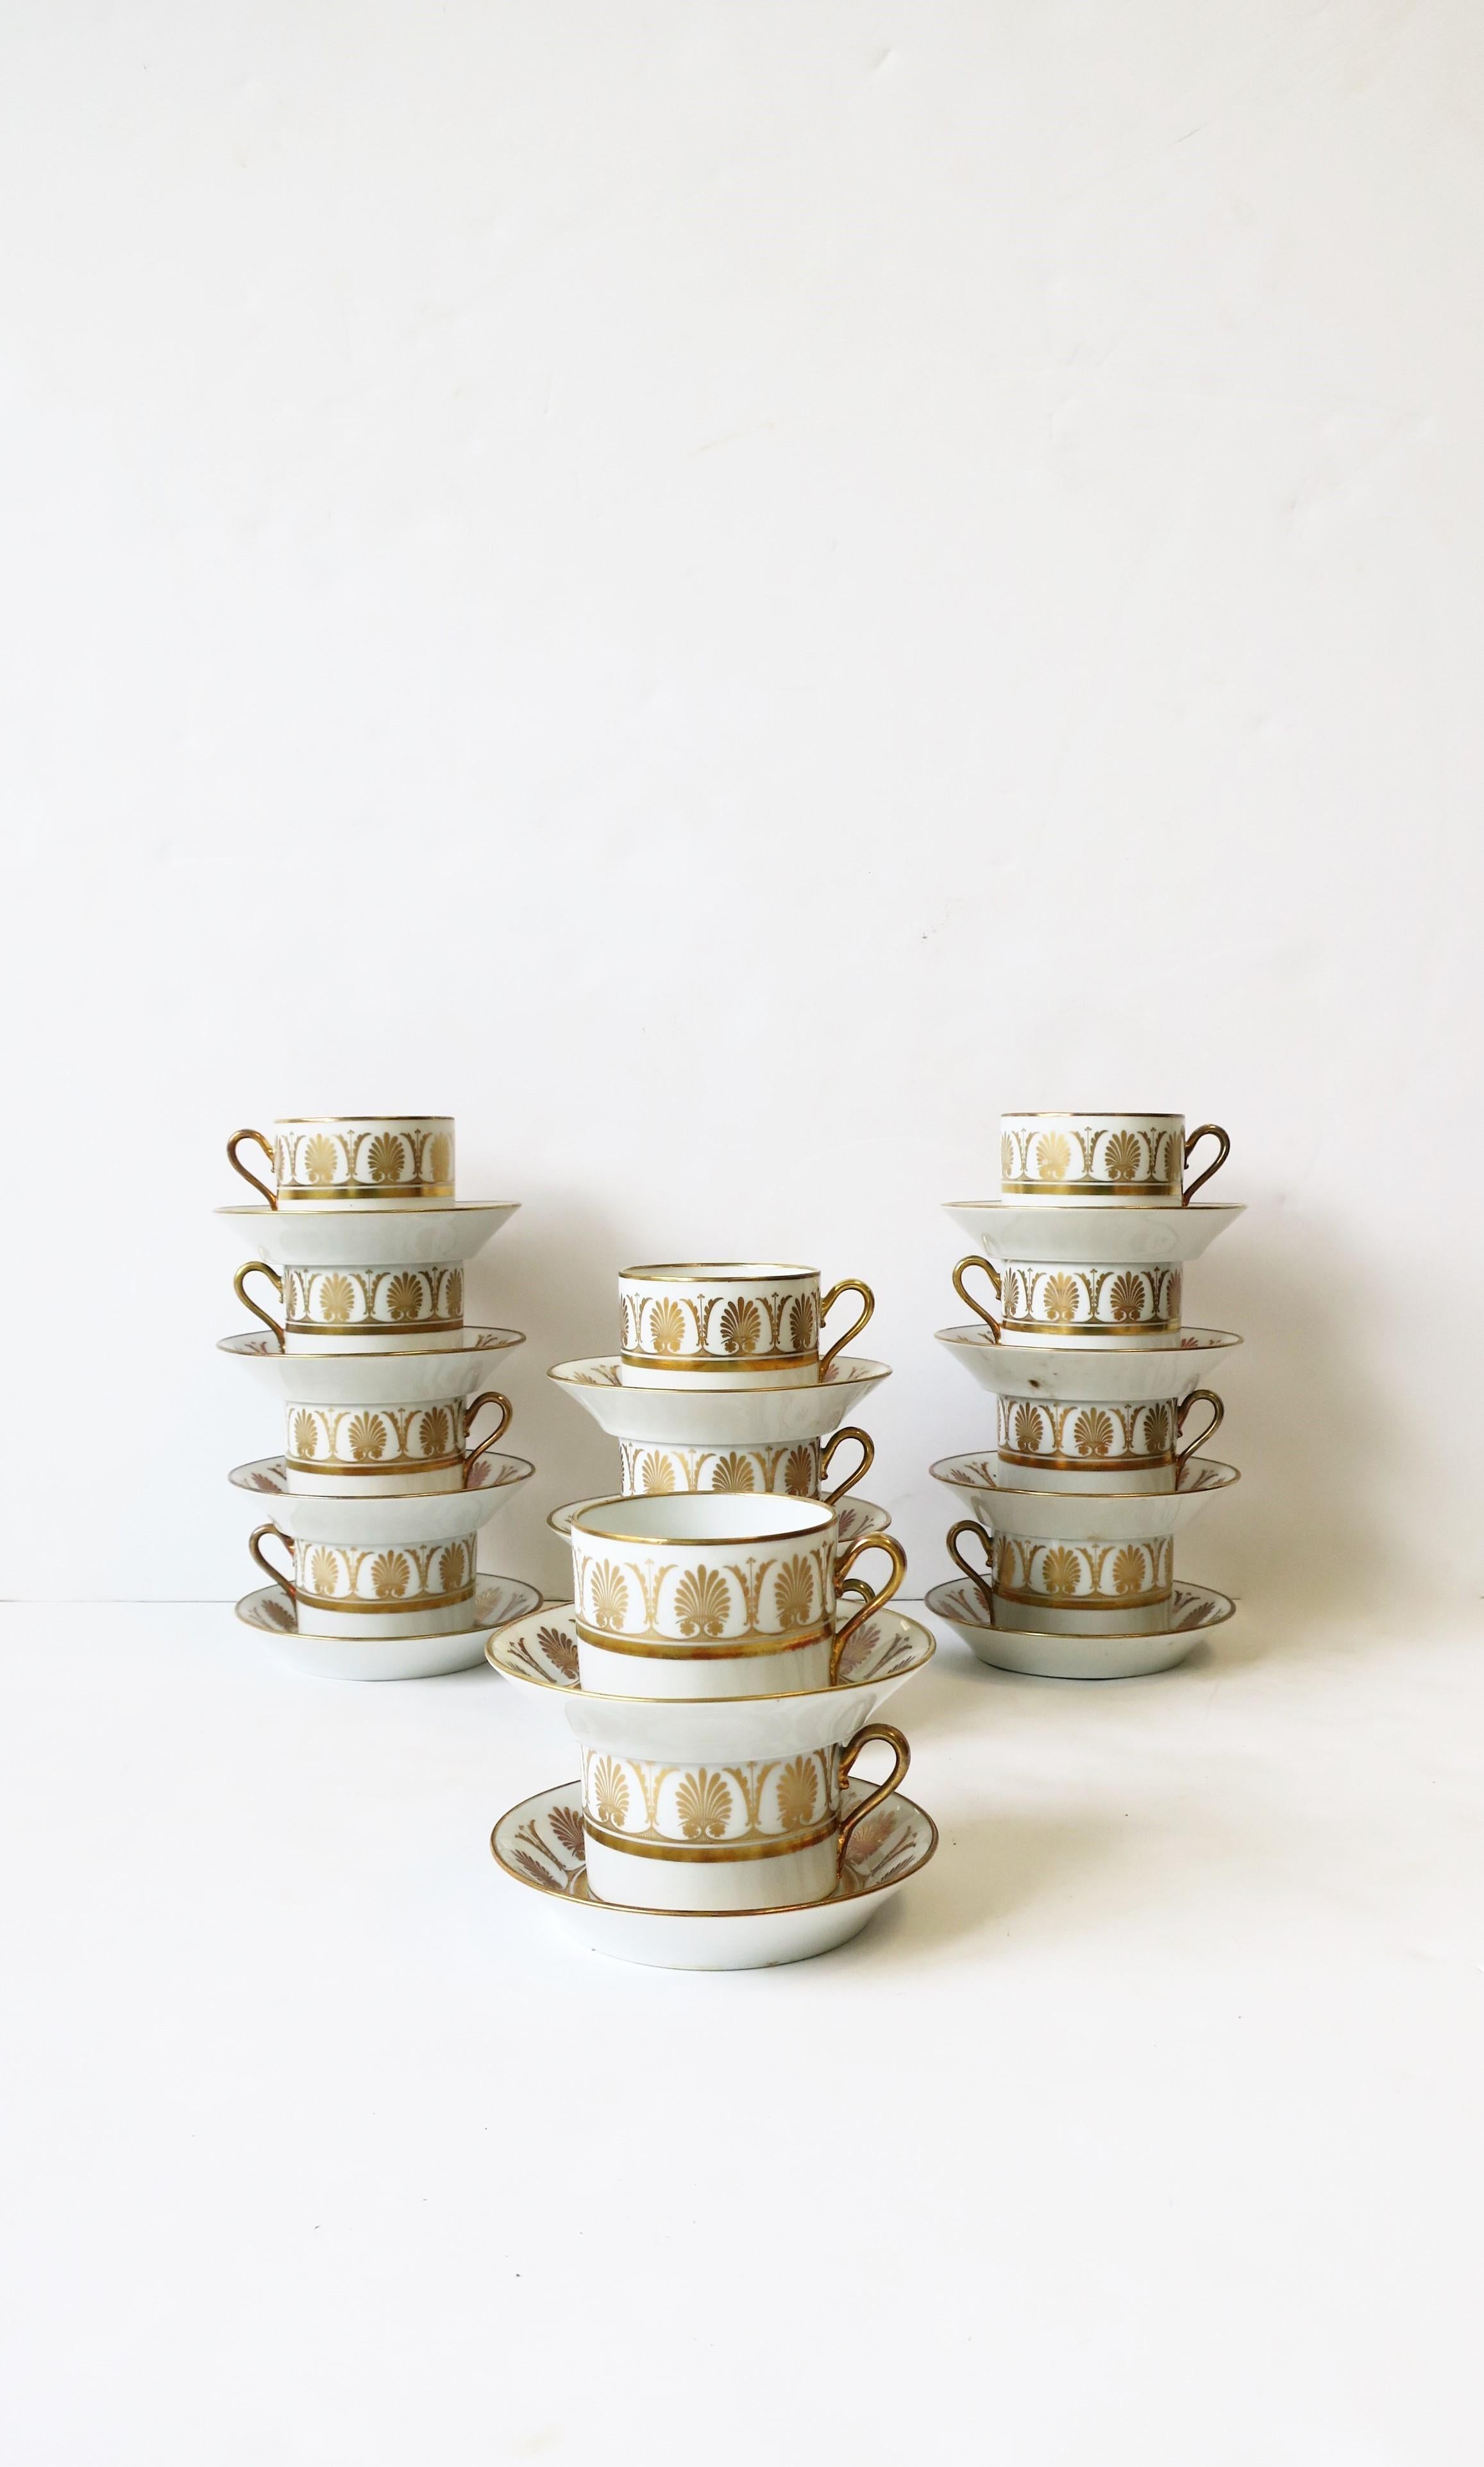 Mid-20th Century Richard Ginori Vintage Italian White & Gold Coffee or Tea Cup Saucer, Set of 12 For Sale